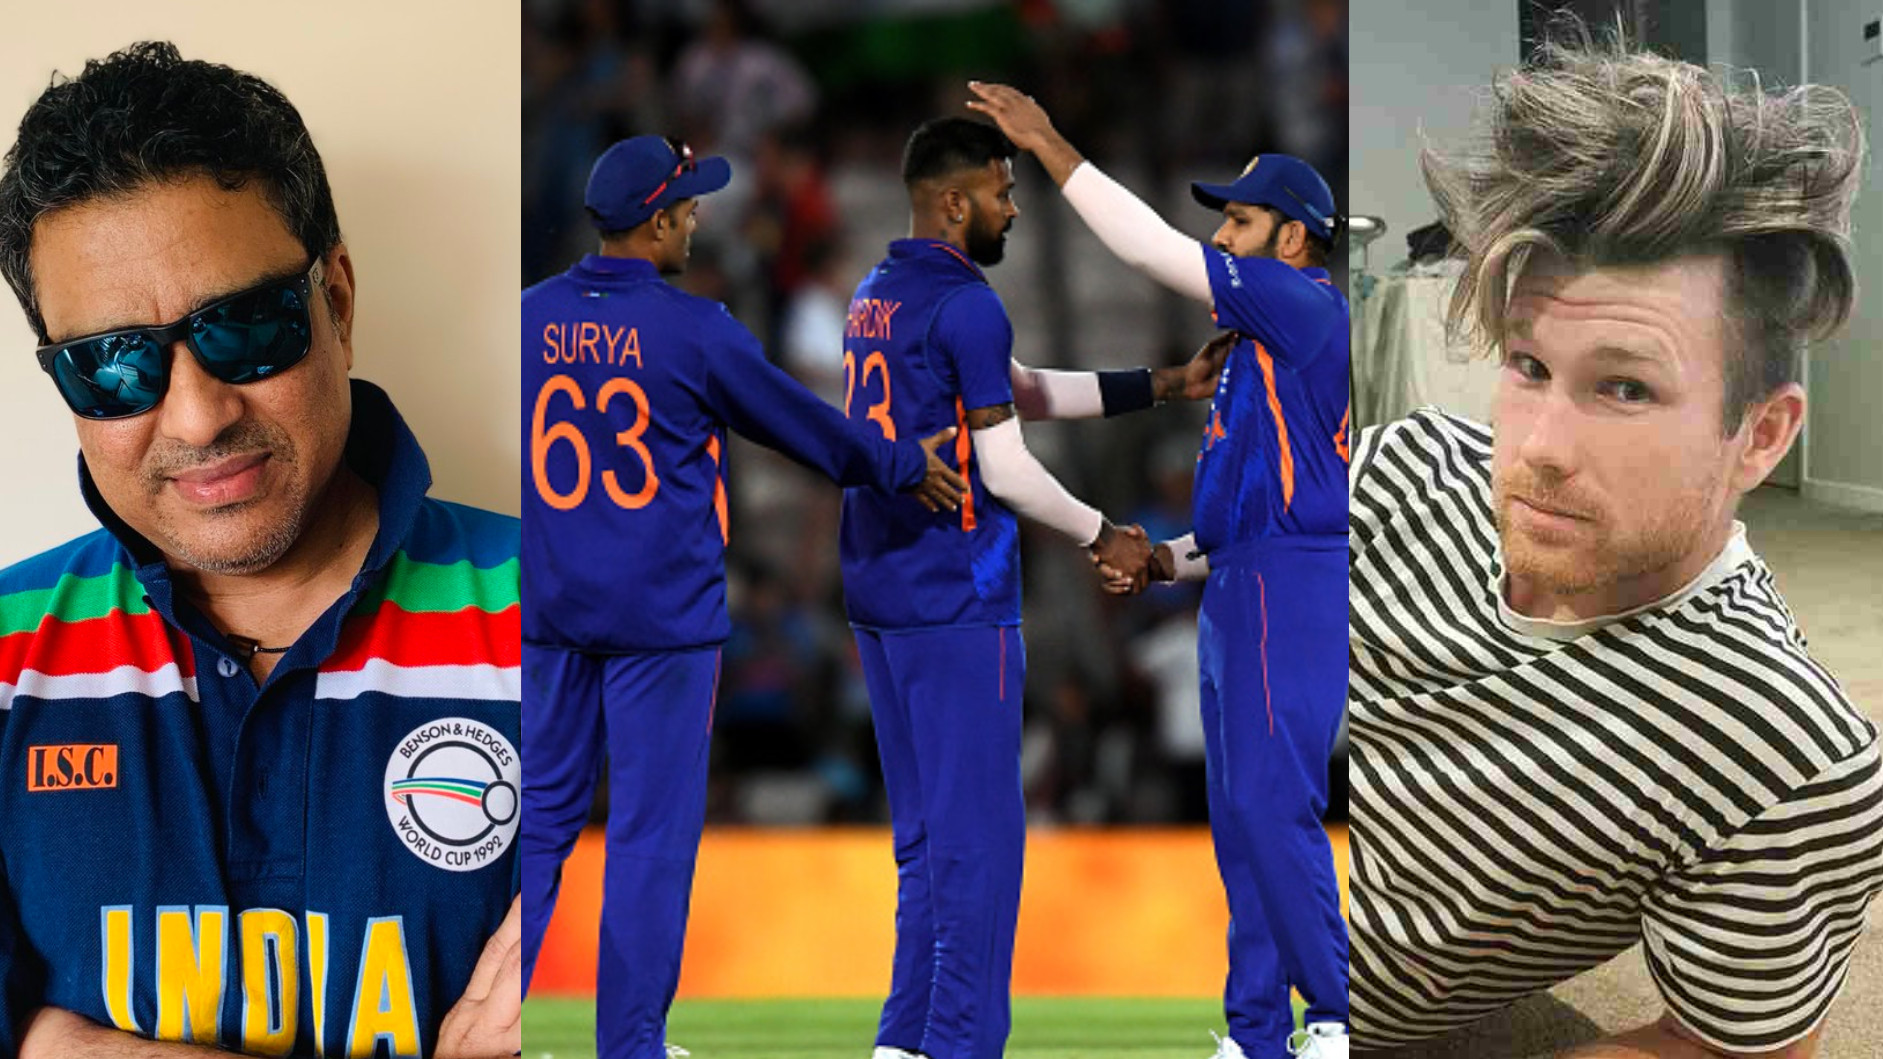 ENG v IND 2022: Cricket fraternity rejoices as India defeats England in 1st T20I by 50 runs; Hardik Pandya standout performer